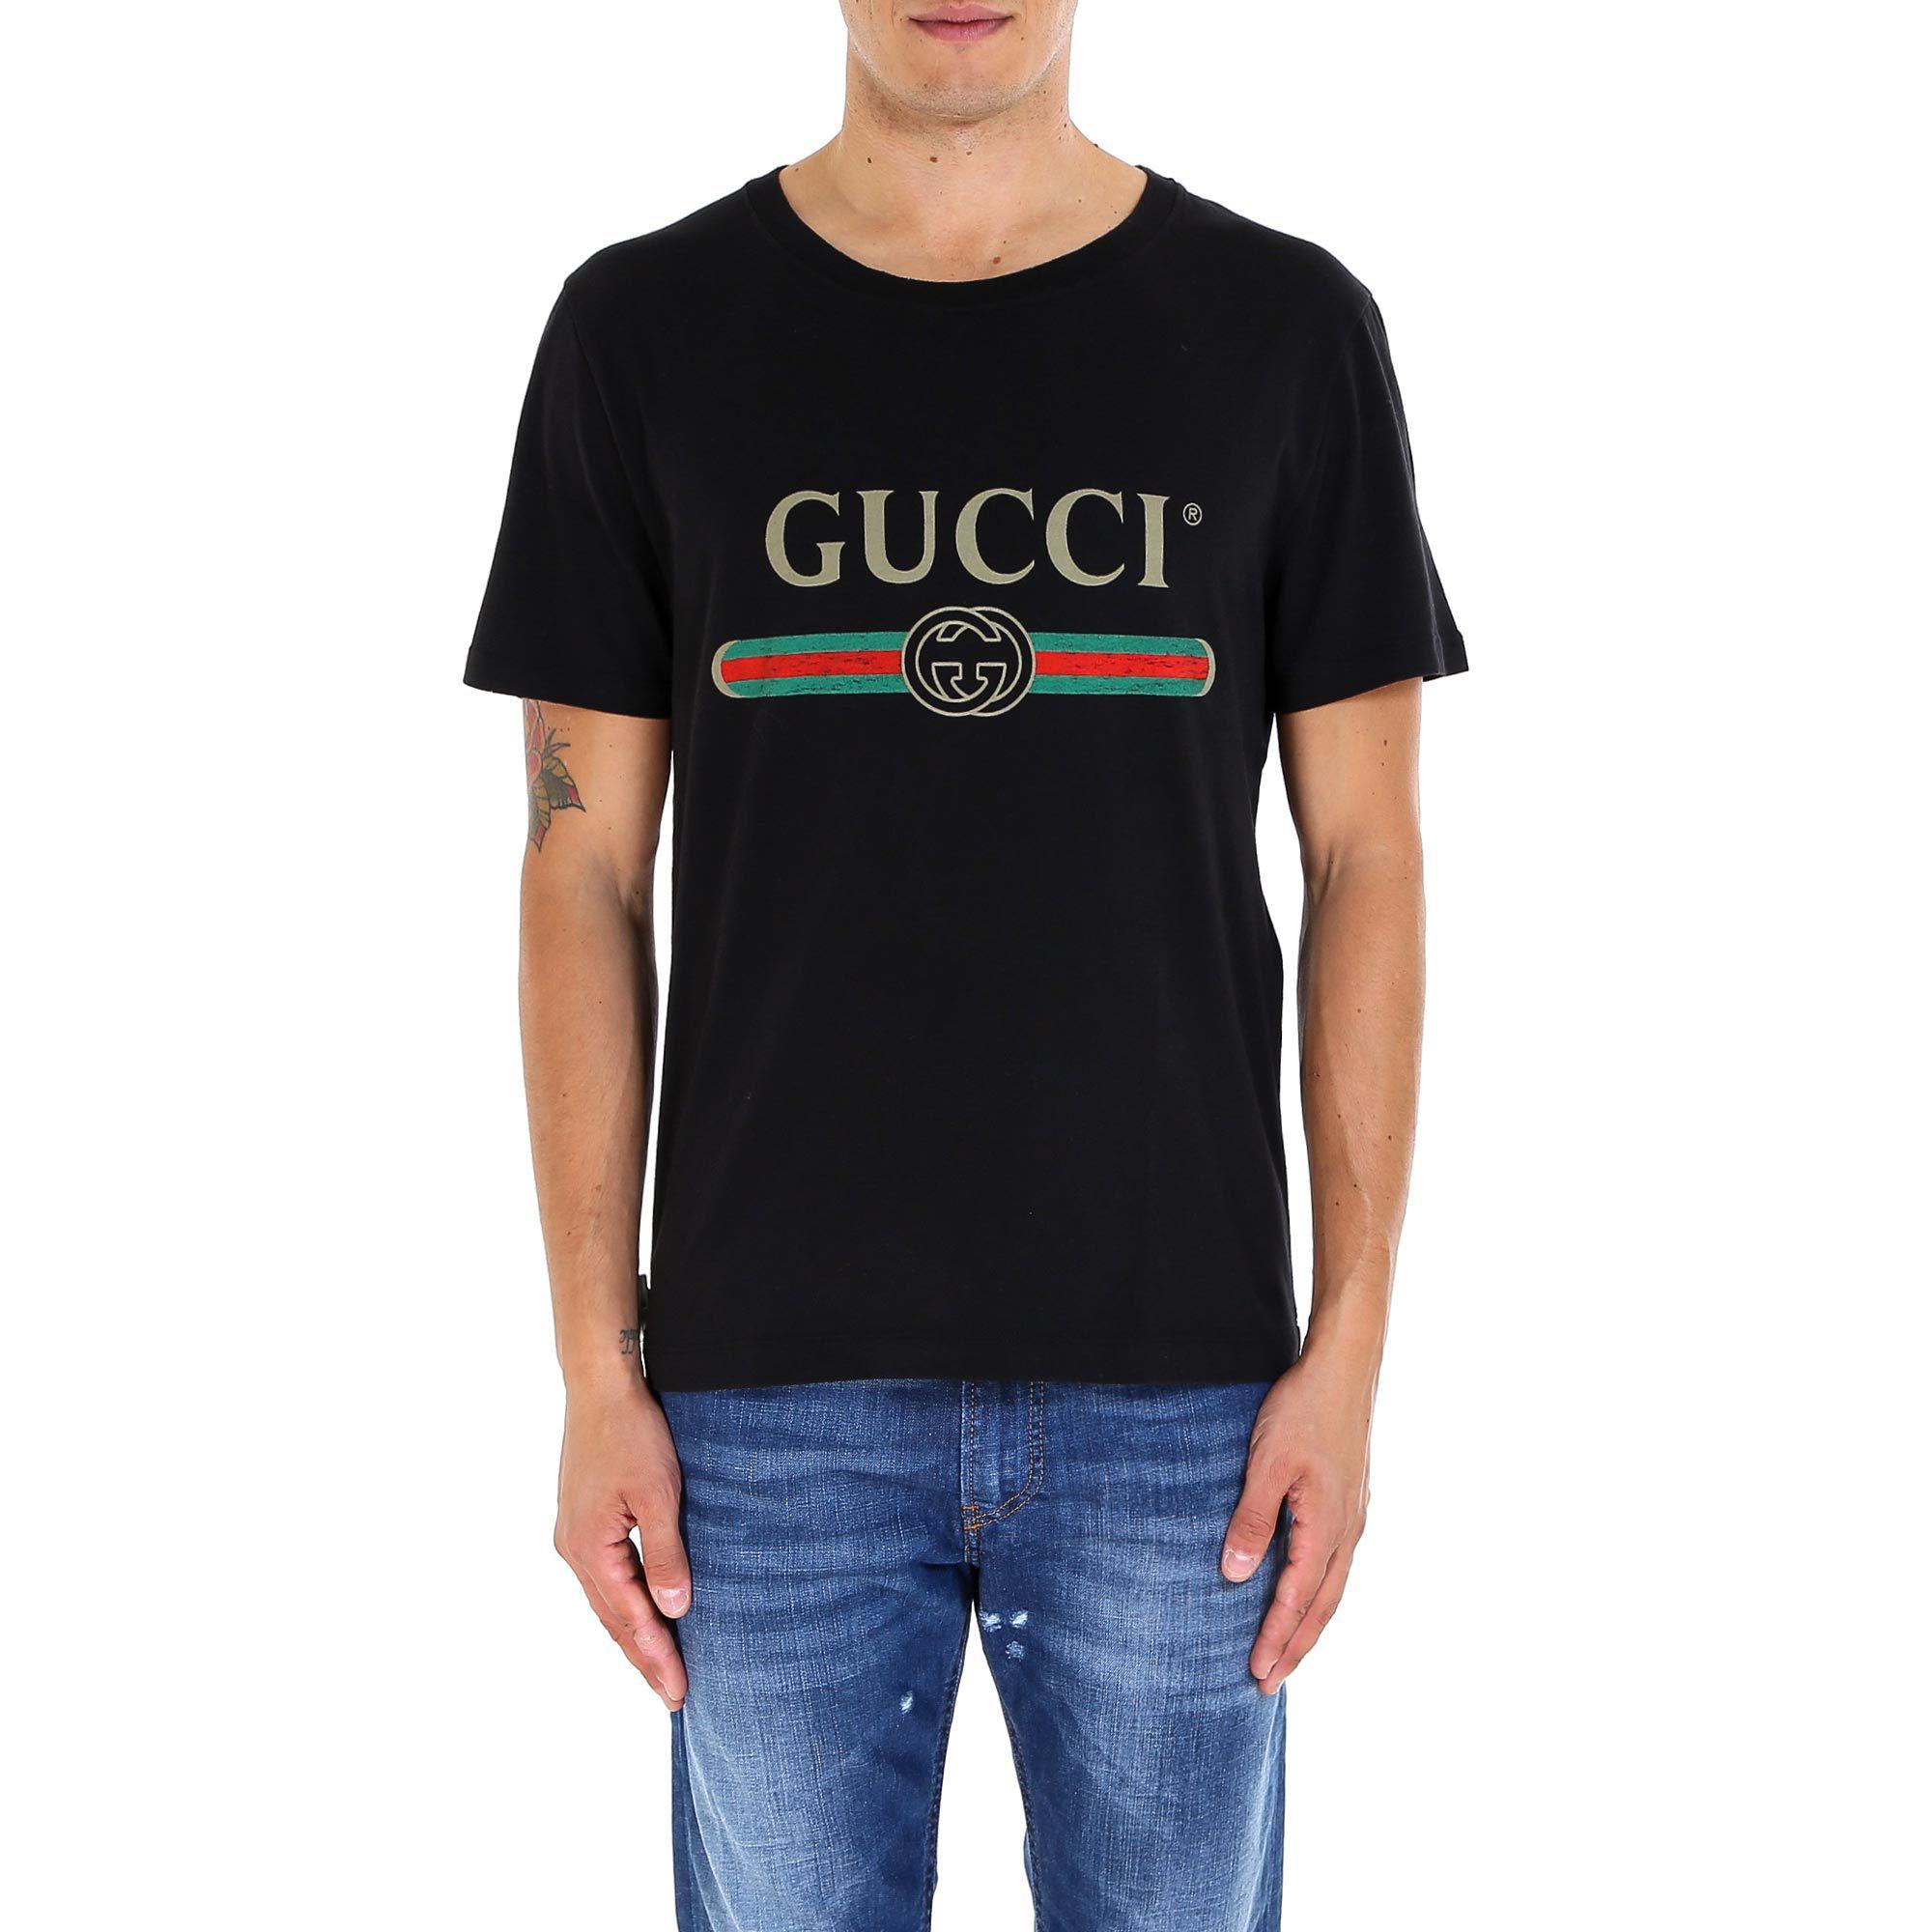 Lyst - Gucci Fake Logo-print Cotton-jersey T-shirt in Black for Men